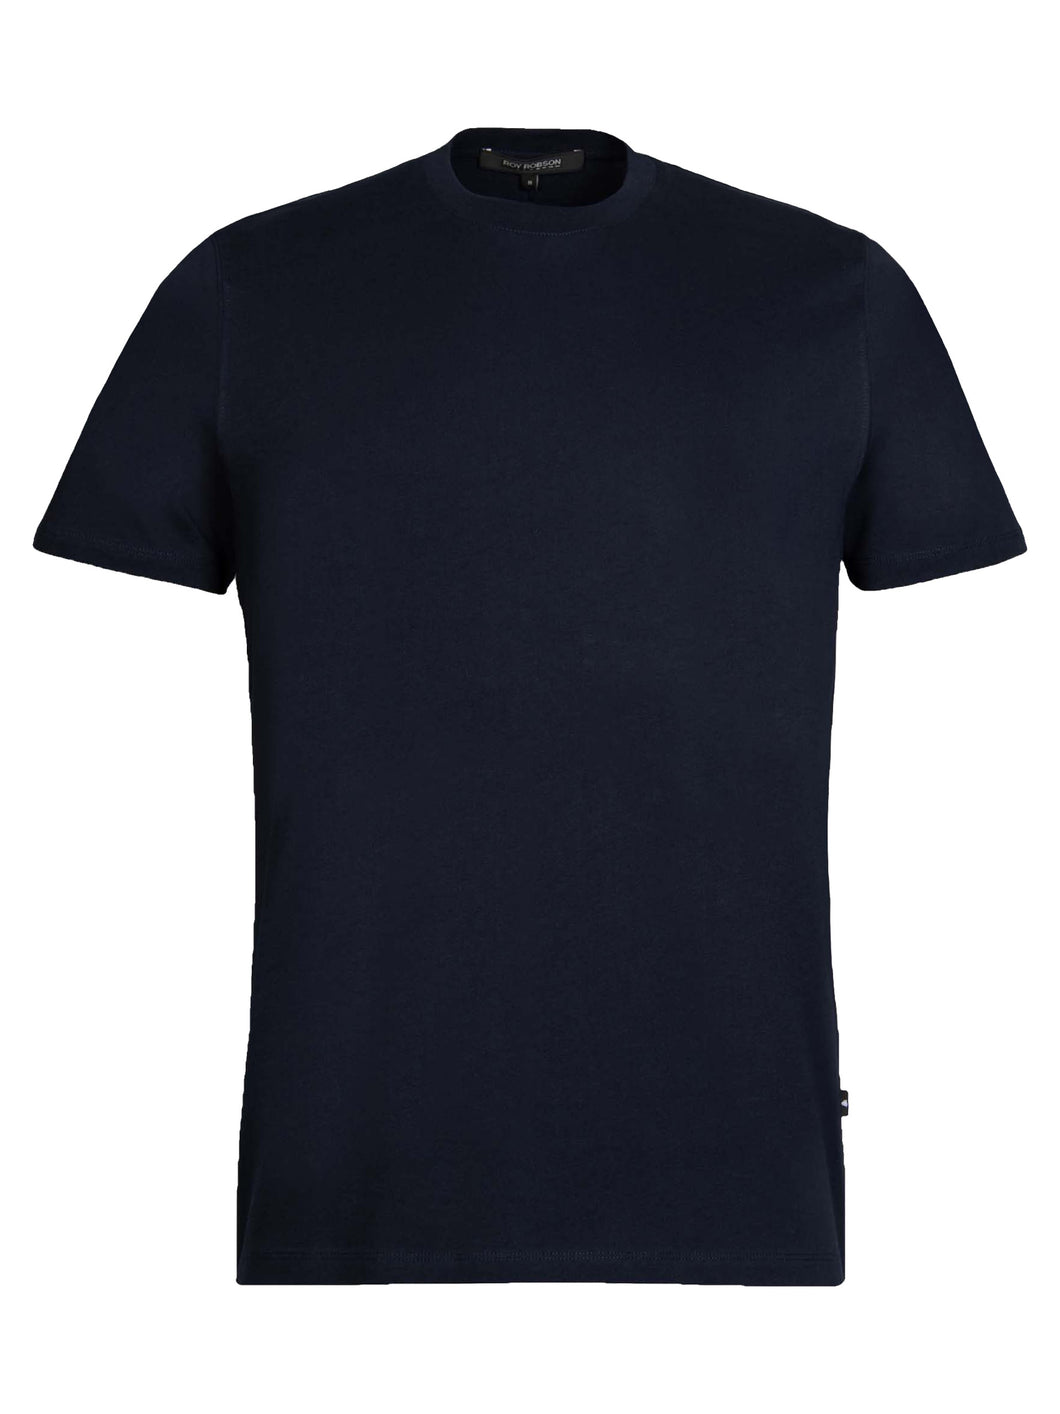 ROY ROBSON T Shirt in Navy 04030